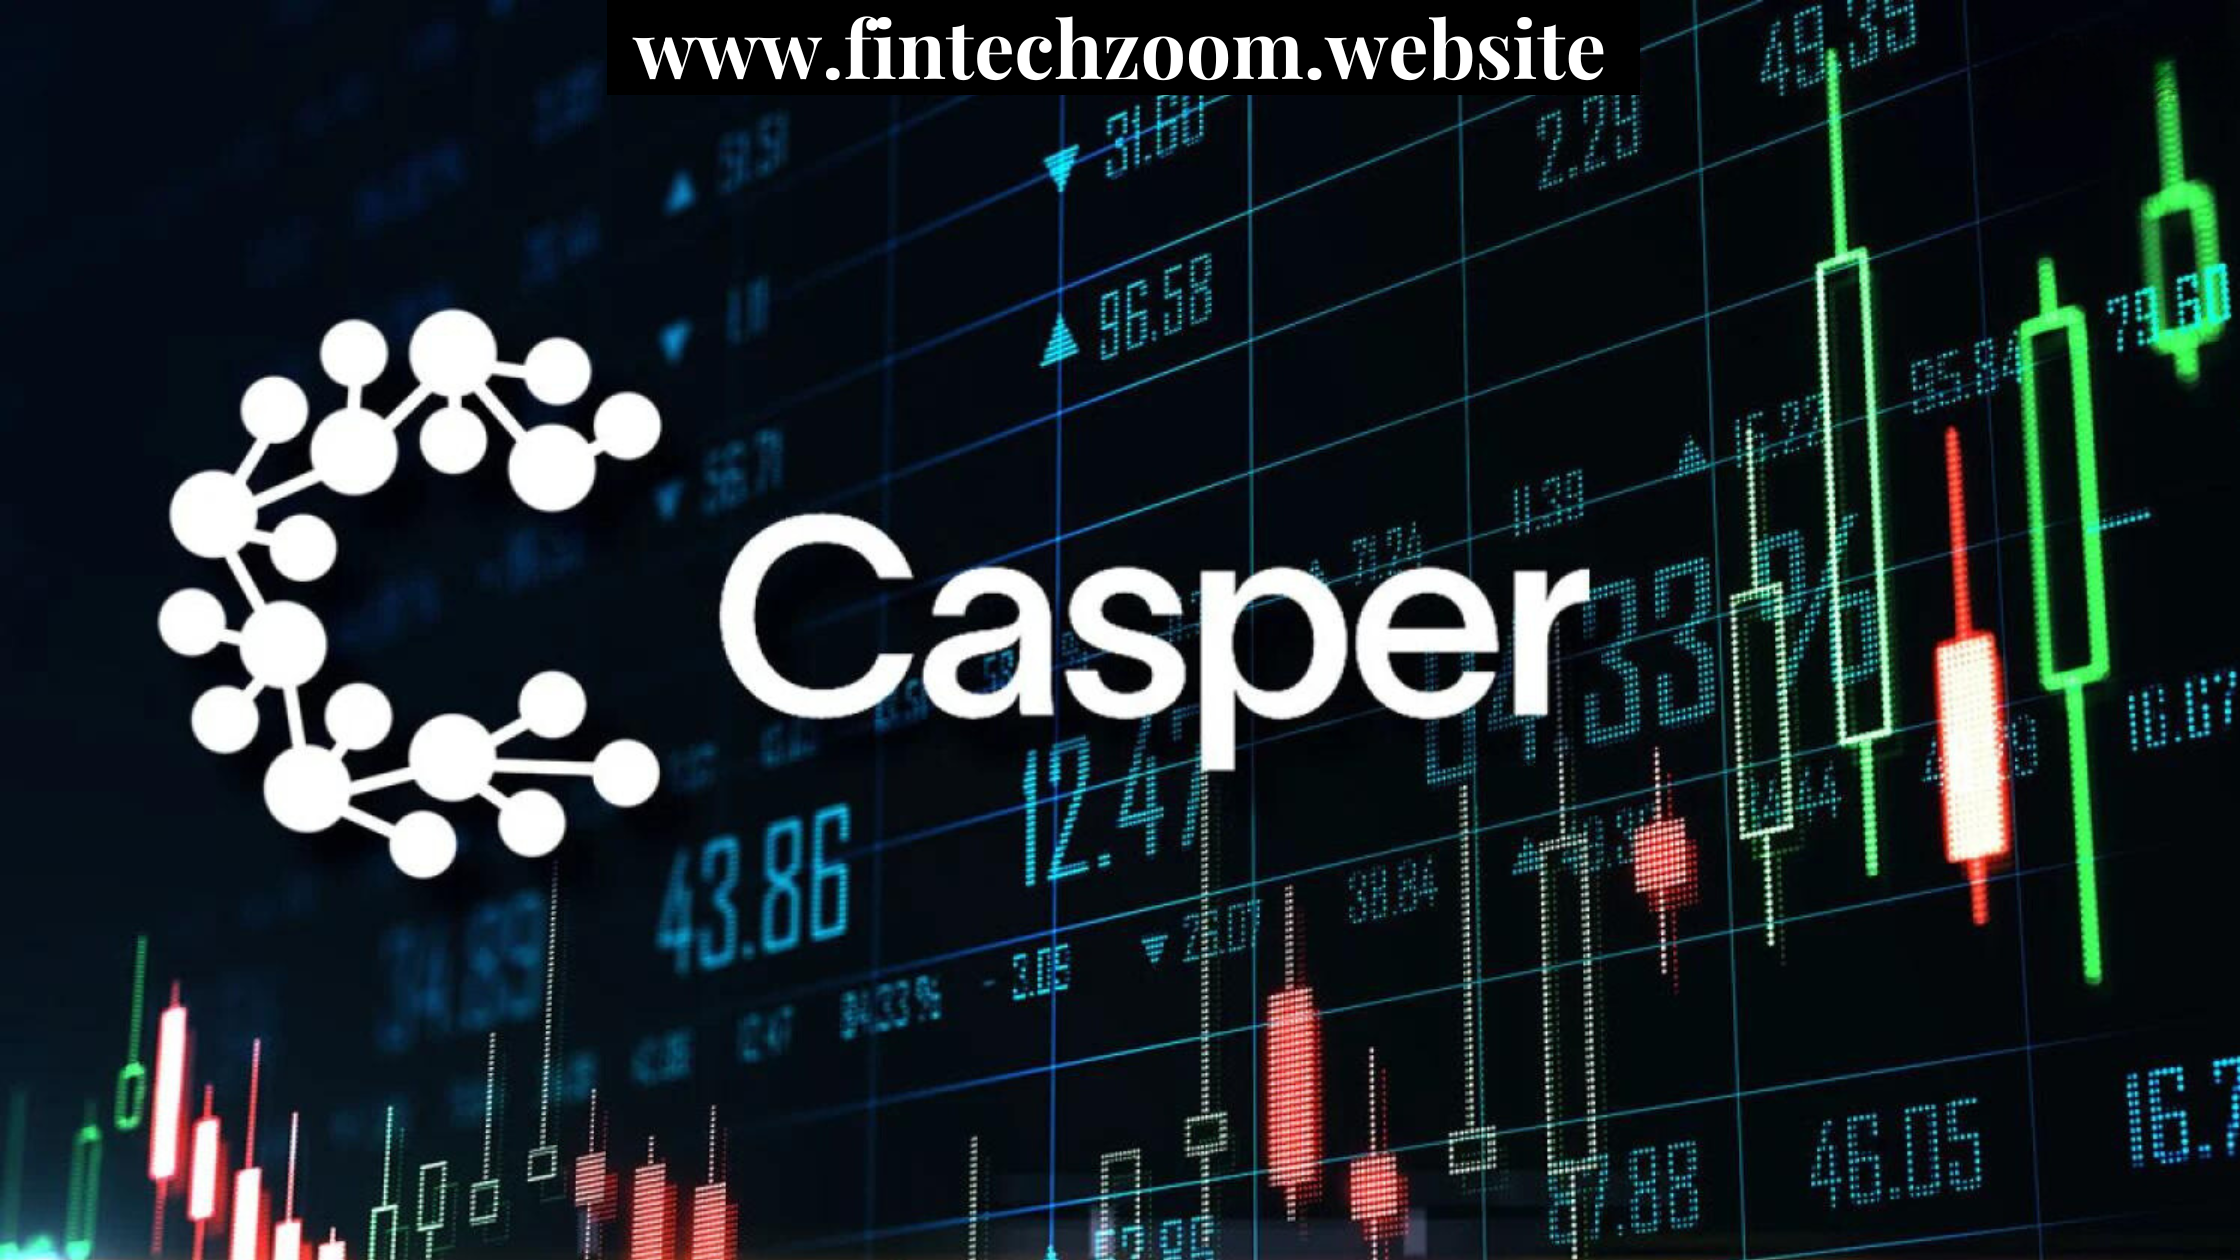 WHEN WAS CASPER FOUNDED CRYPTO WORLD